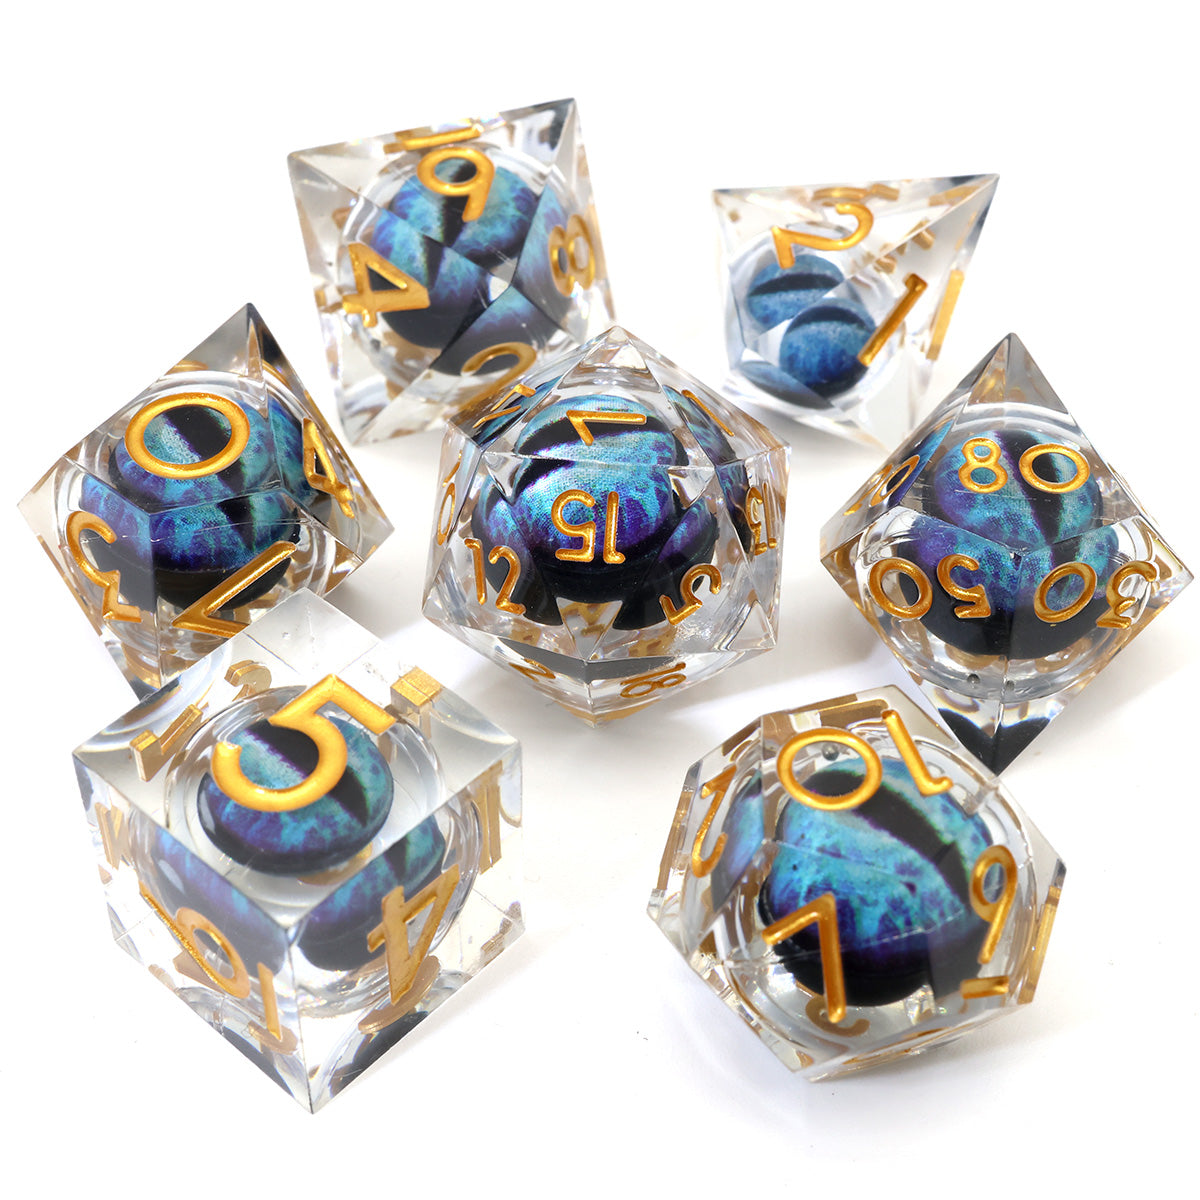 Sharp edge DND, TTRPG dice for role playing games, dungeons and dragons, dice goblin and critical critter collectors